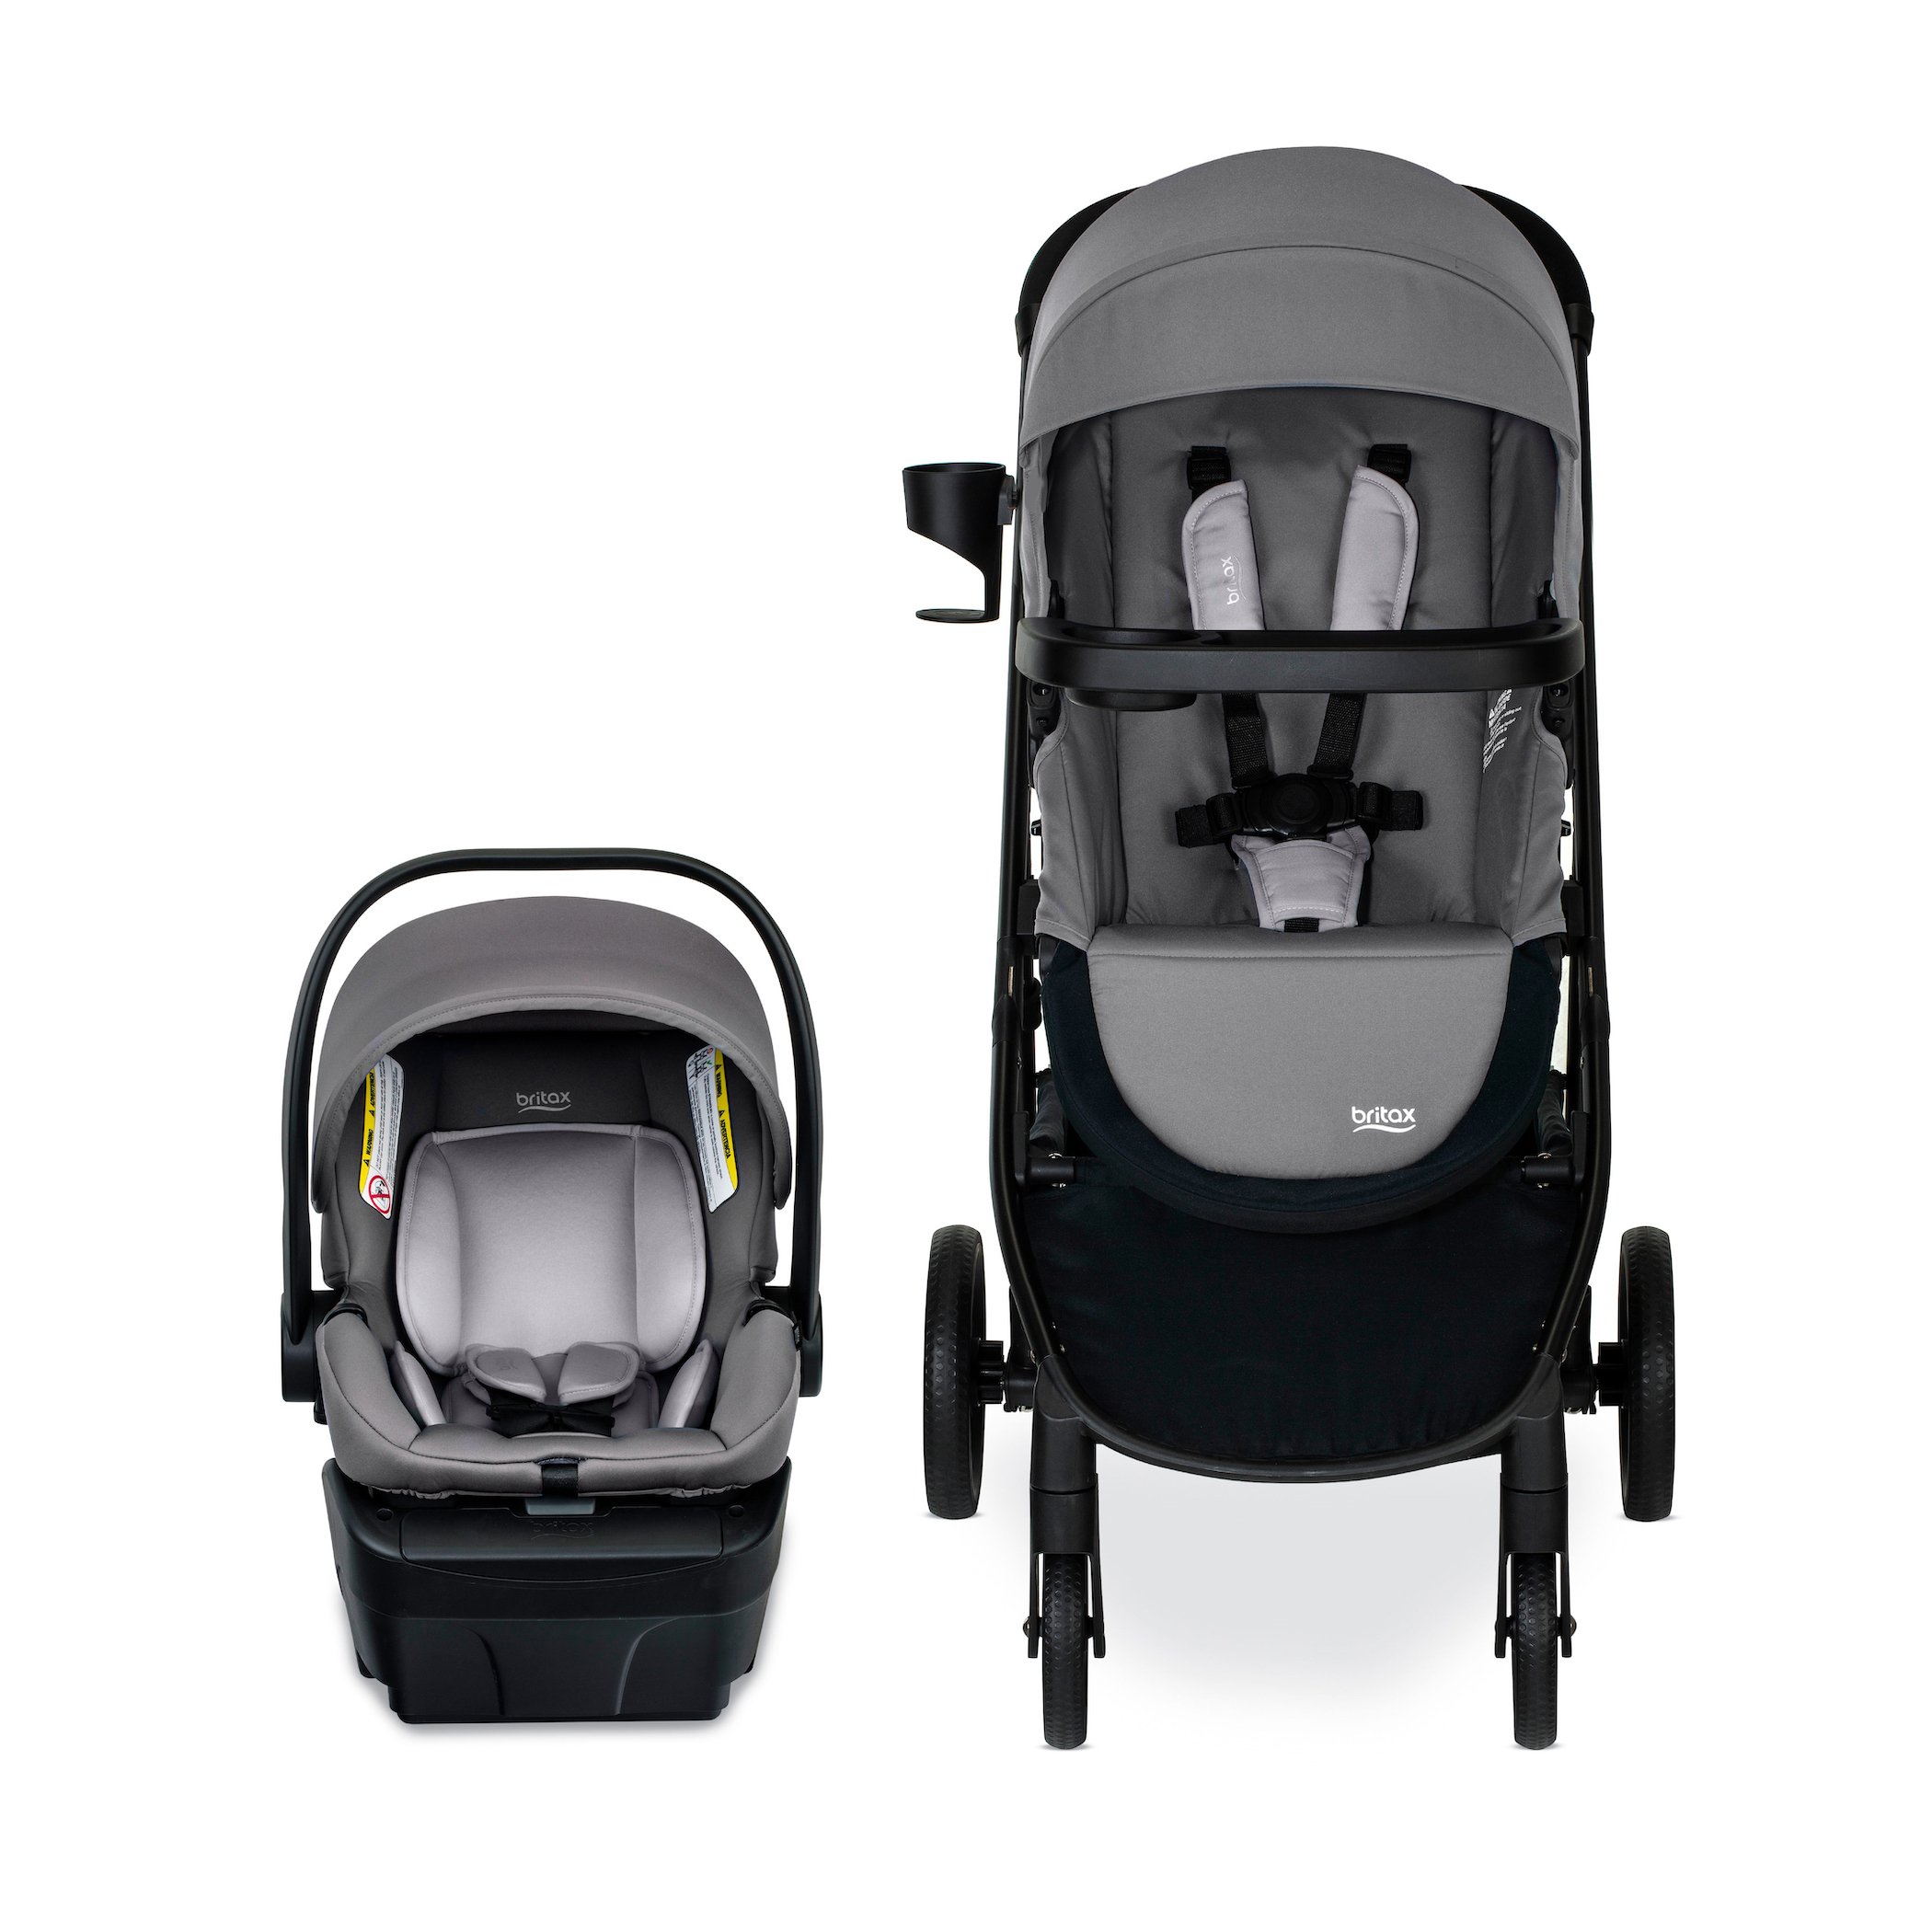 Graphite Glacier Center Facing Willow Infant Car Seat and Brook Stroller